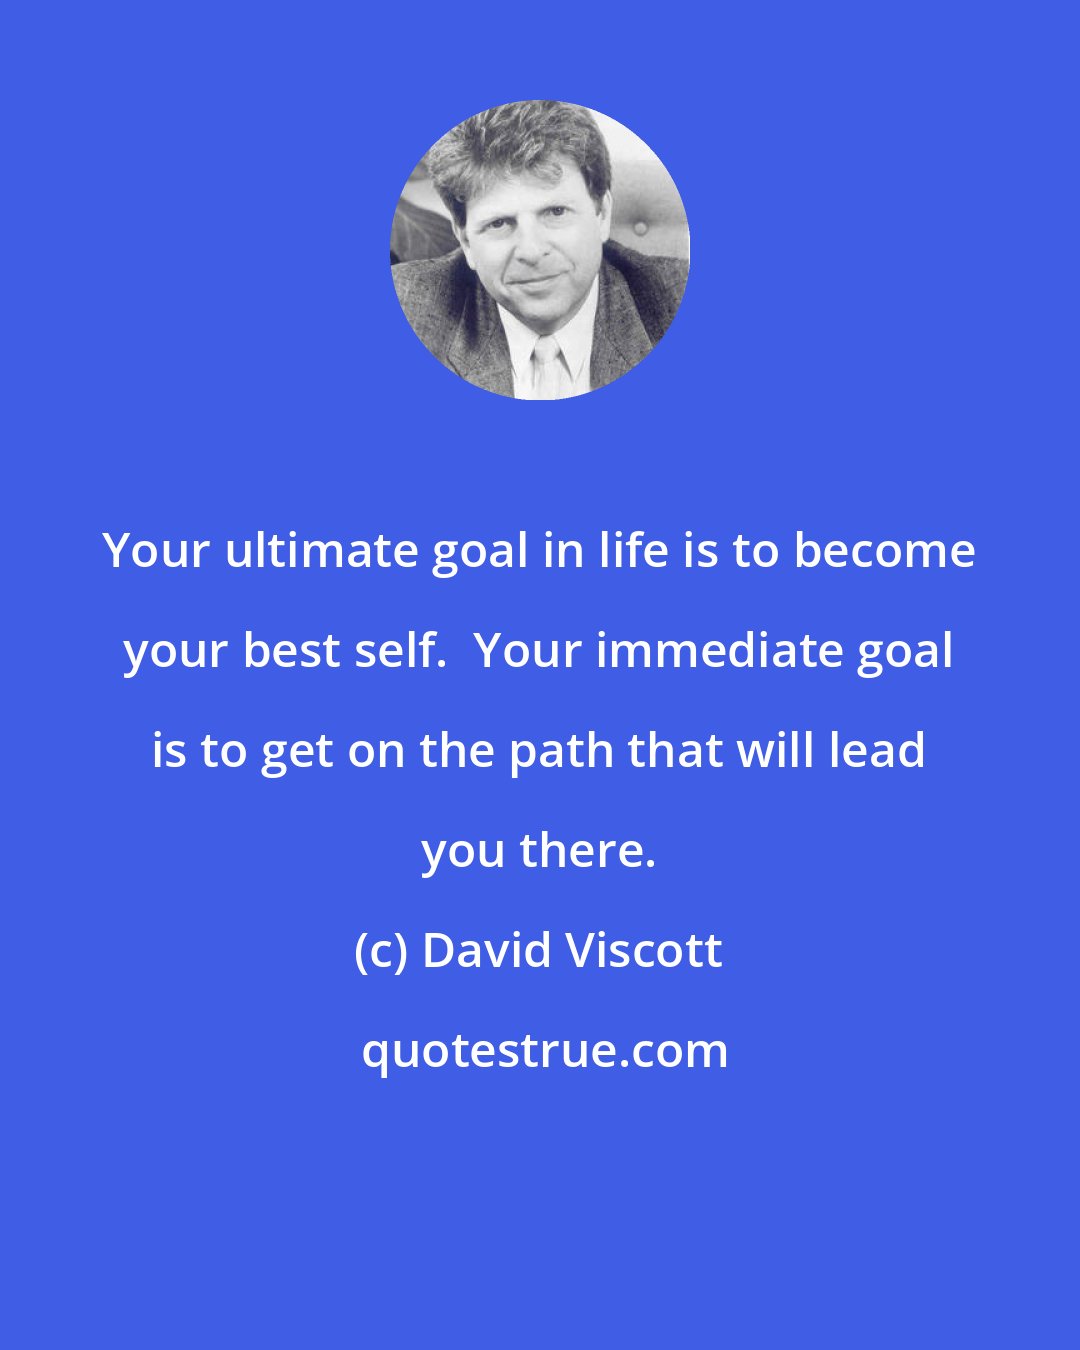 David Viscott: Your ultimate goal in life is to become your best self.  Your immediate goal is to get on the path that will lead you there.